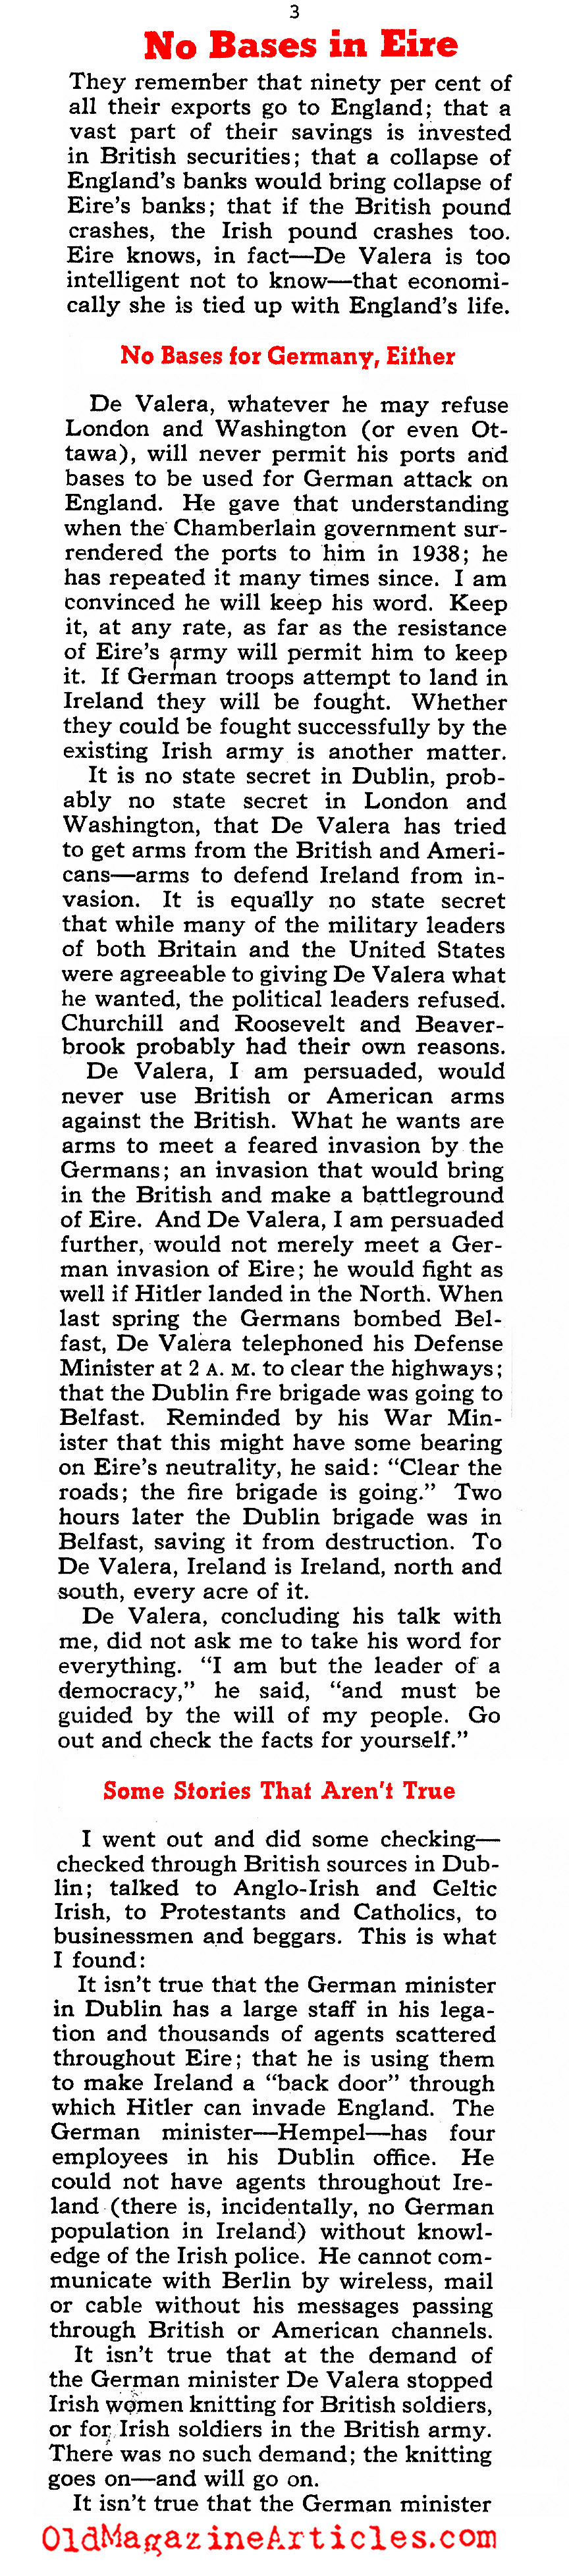 Ireland Bows Out of the War (Collier's Magazine, 1942)